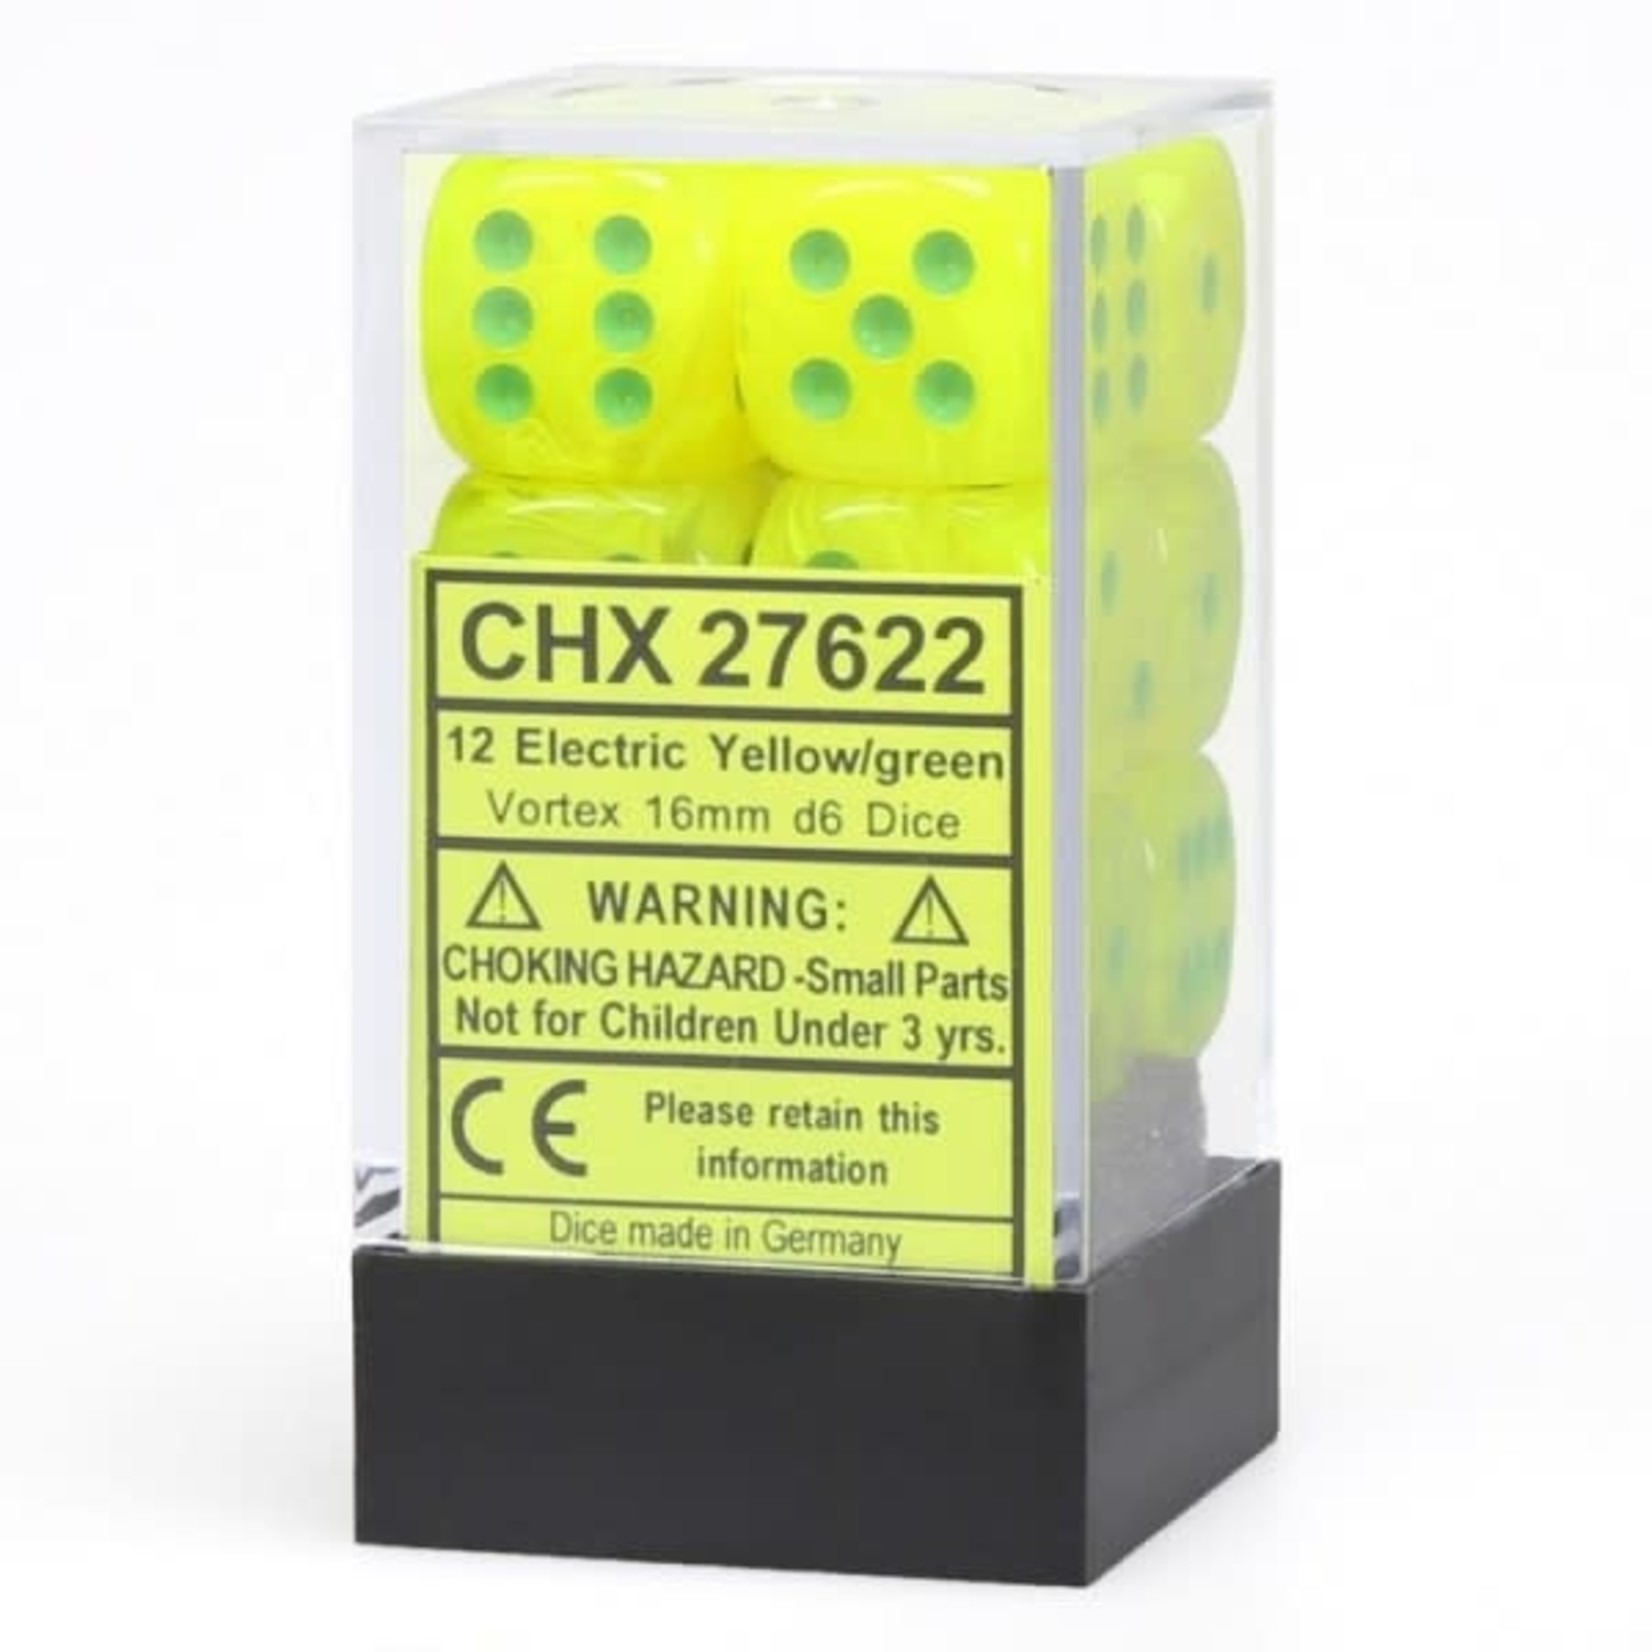 Chessex Vortex Electric Yellow green 16mm d6s (12)